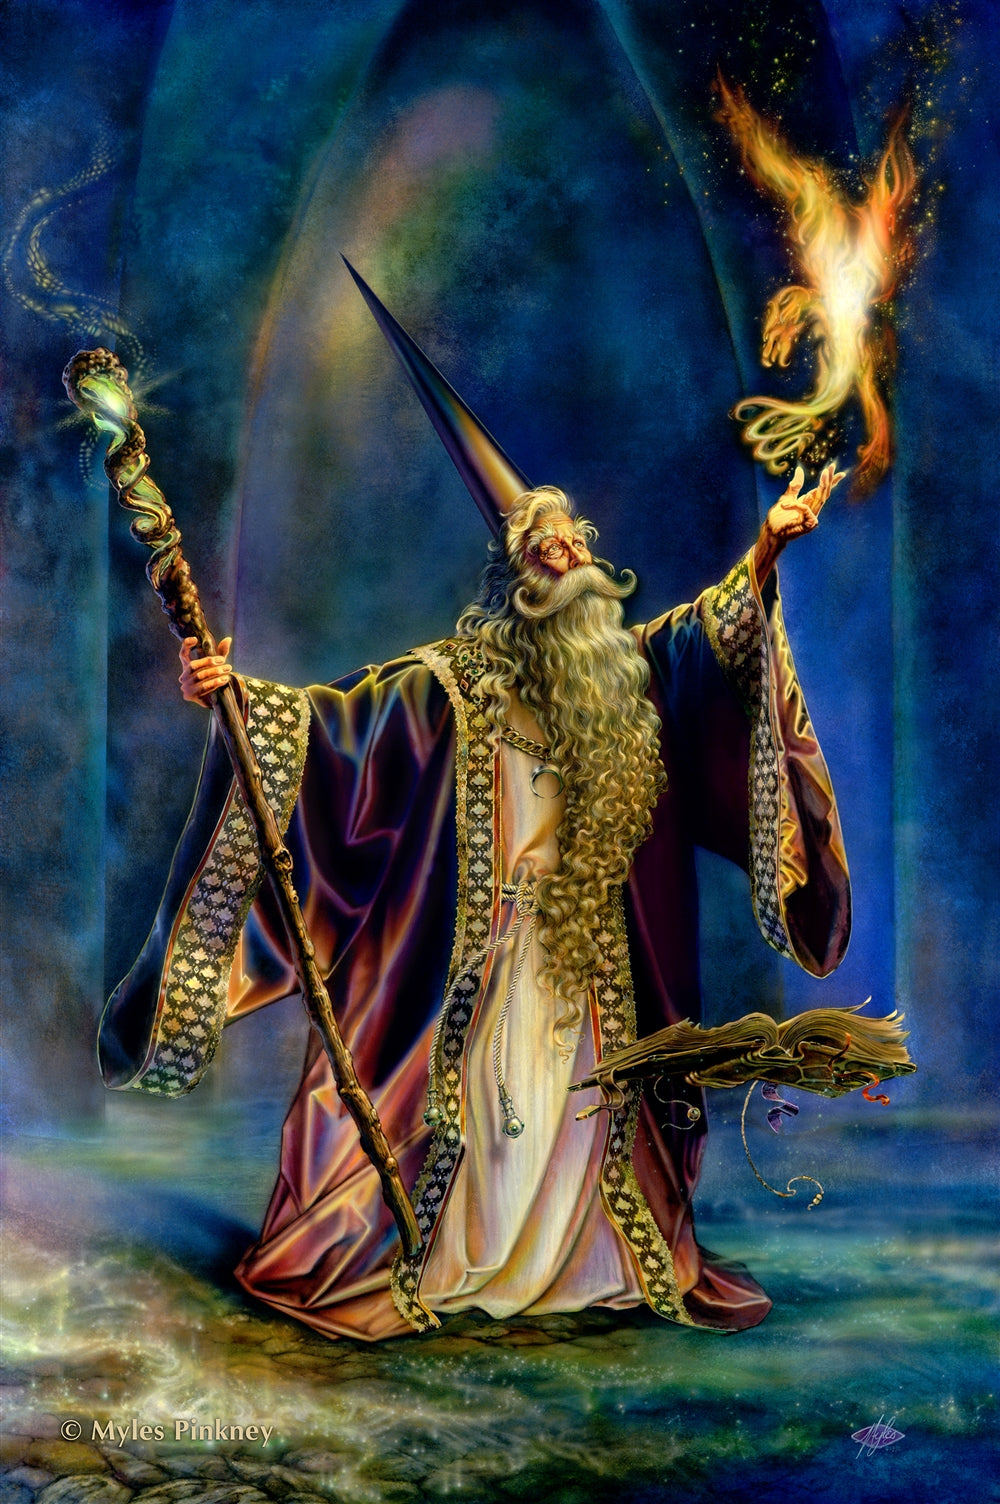 Wizard by Myles Pinkney, Greeting Card